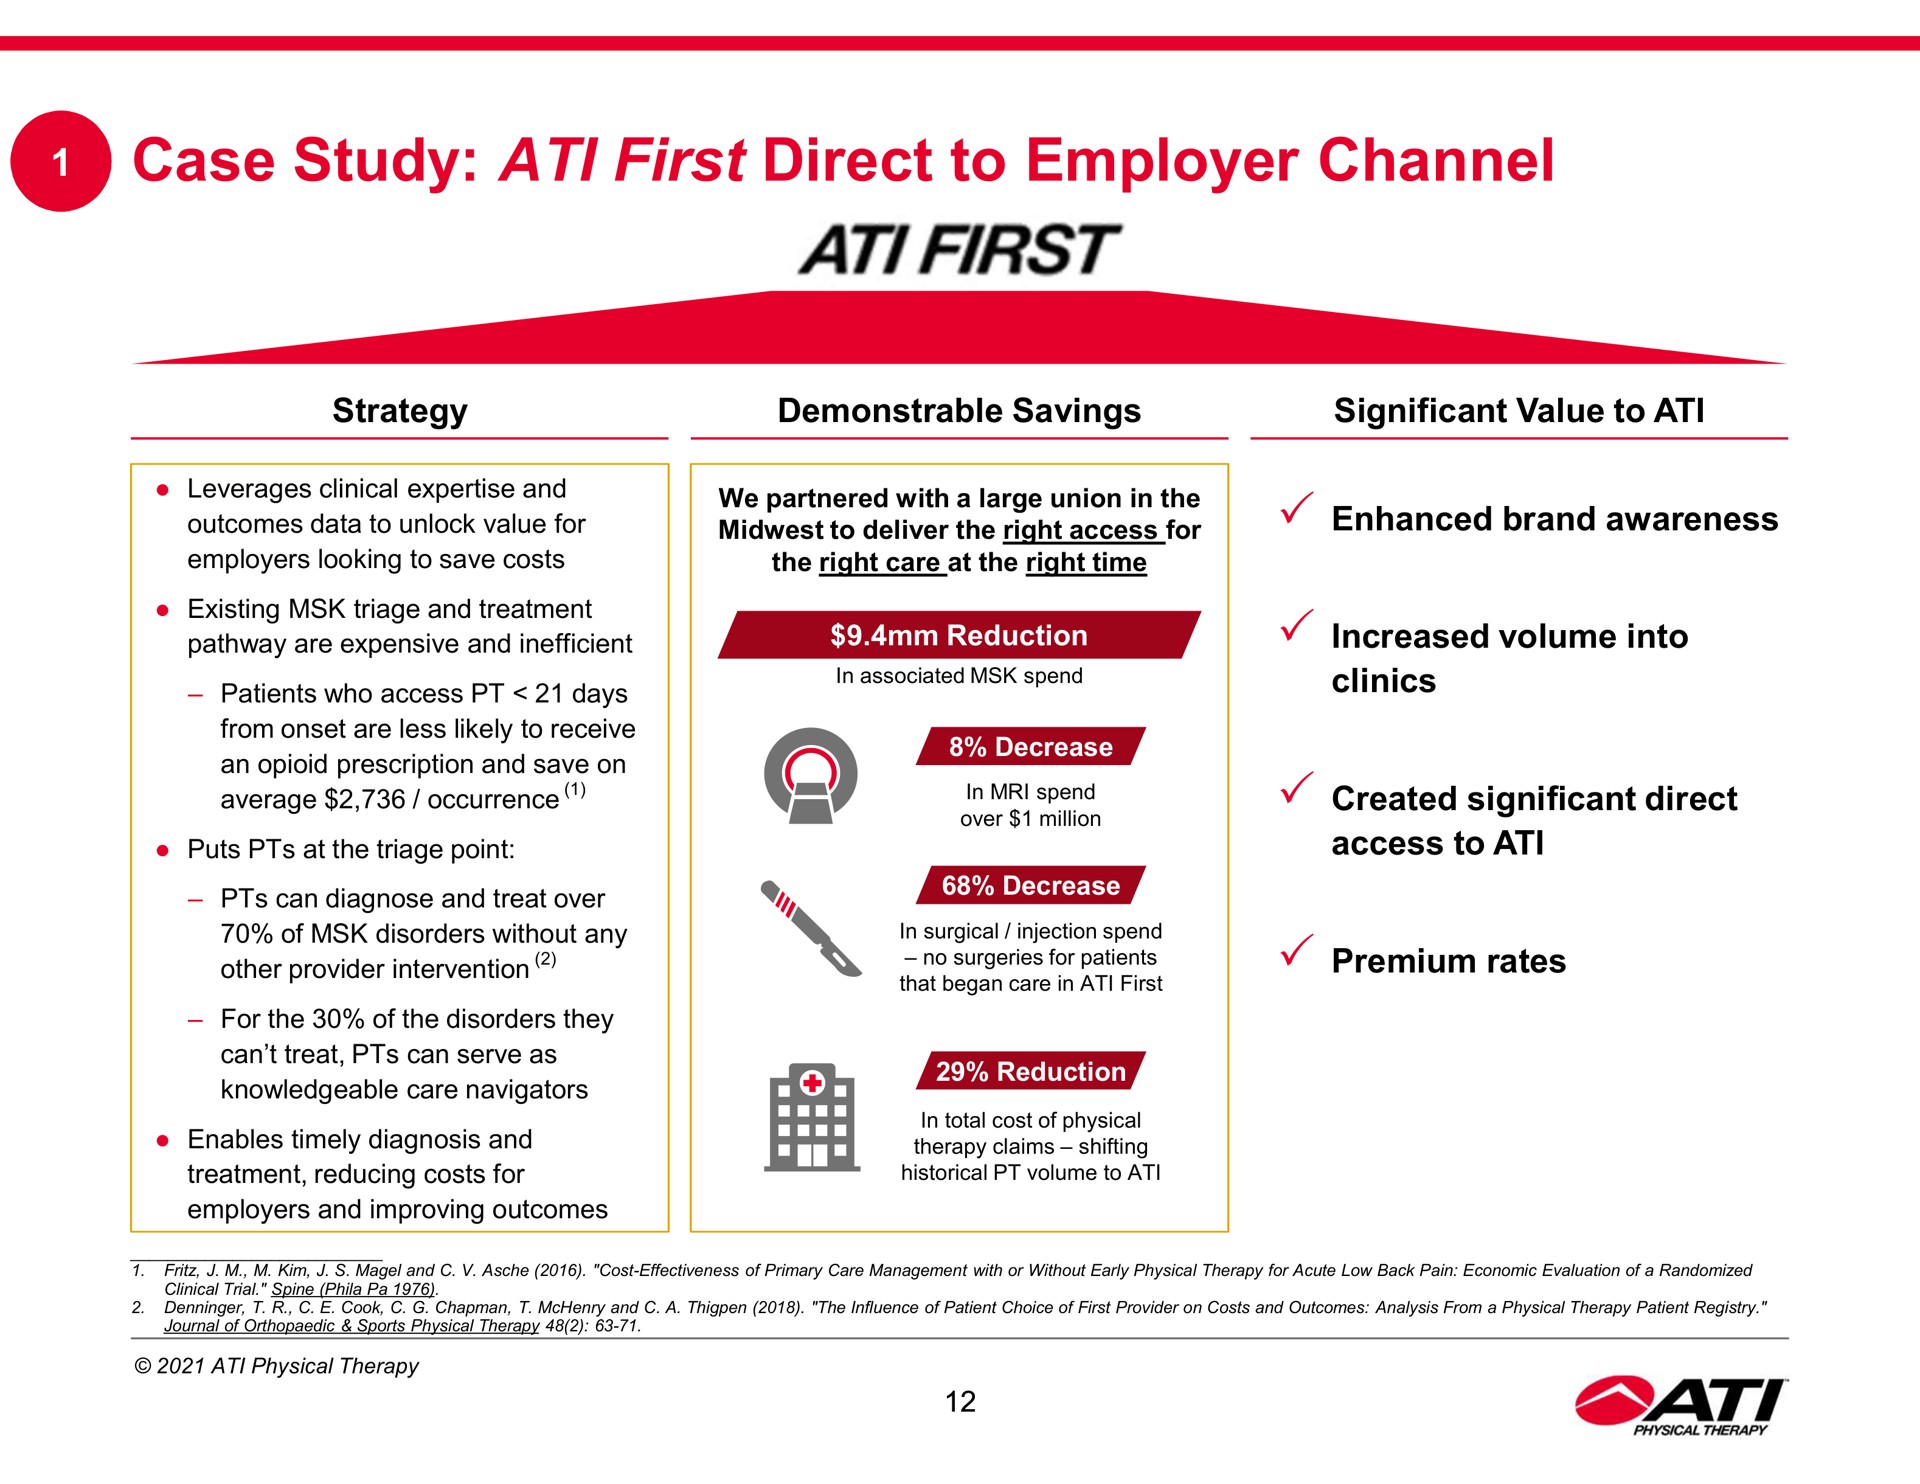 case study first direct to employer channel all a | ATI Physical Therapy